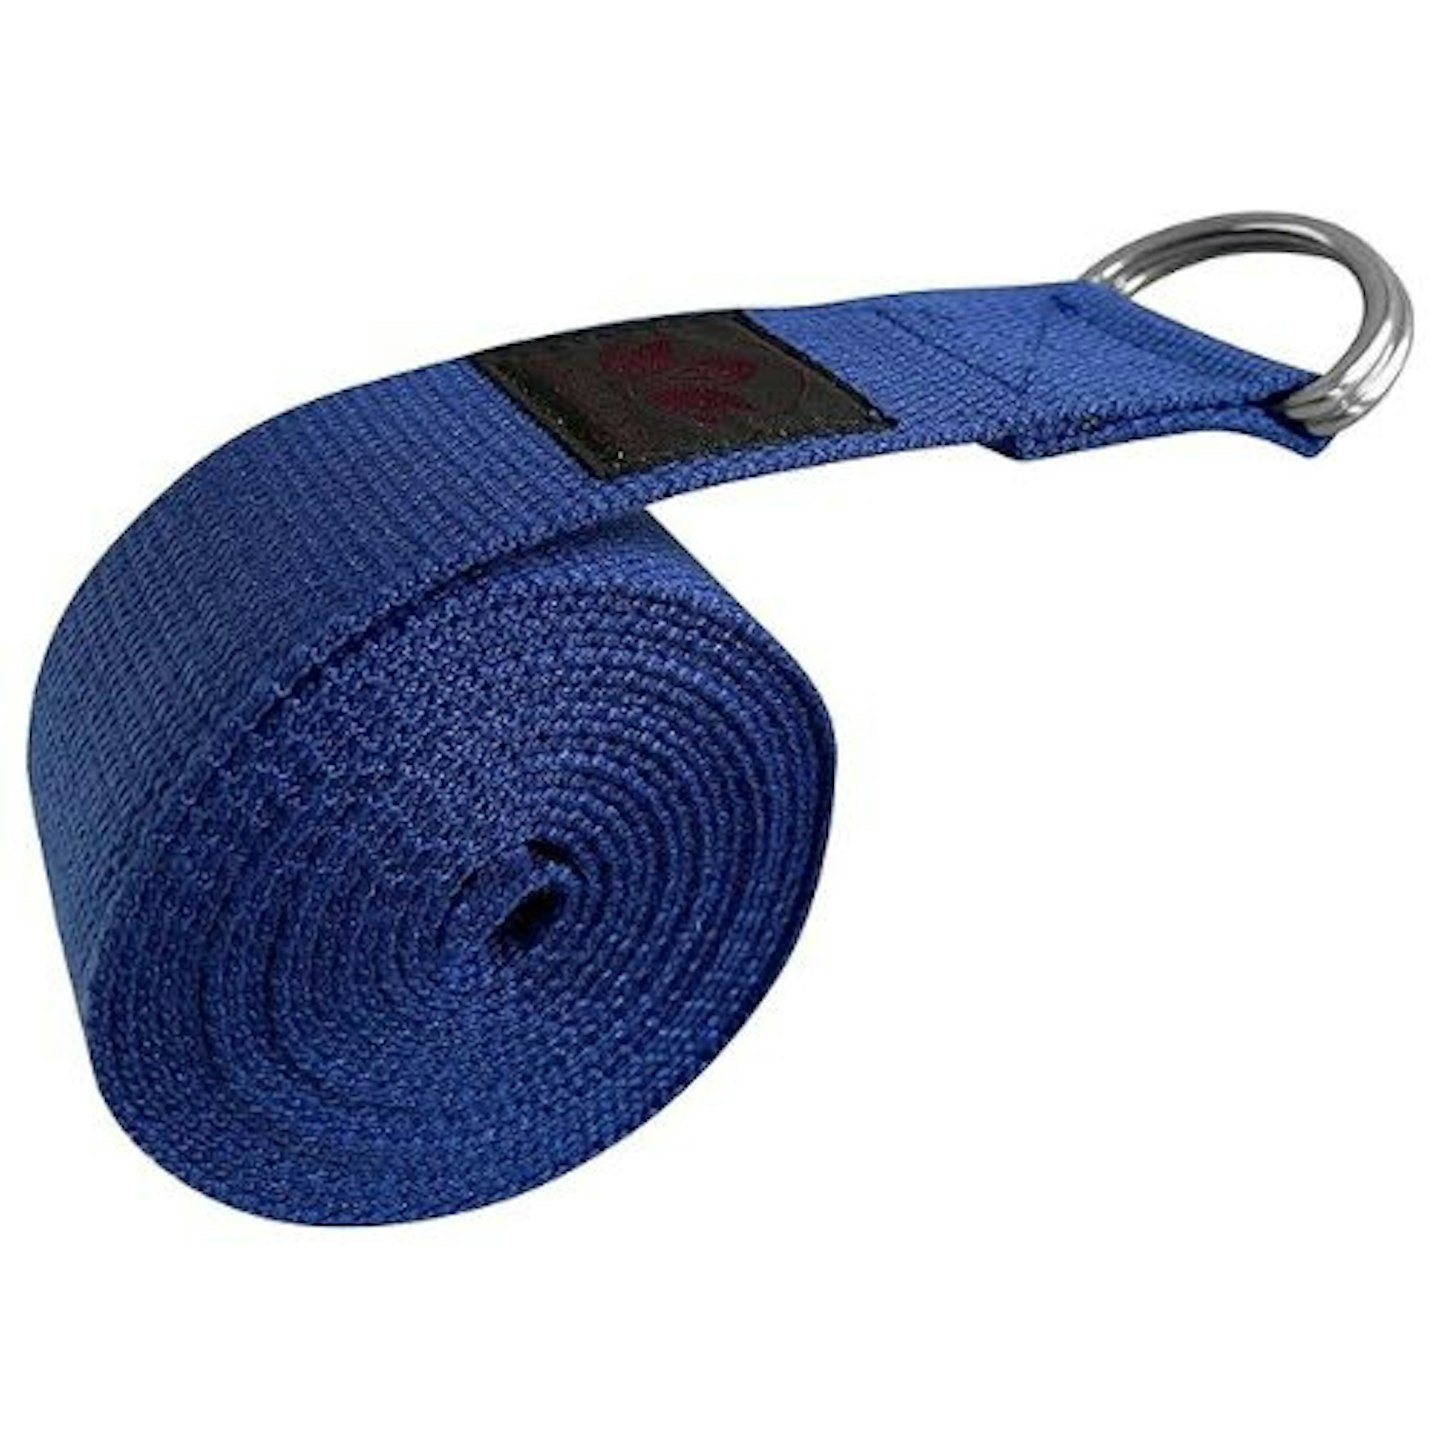 Clever Yoga Strap for Stretching